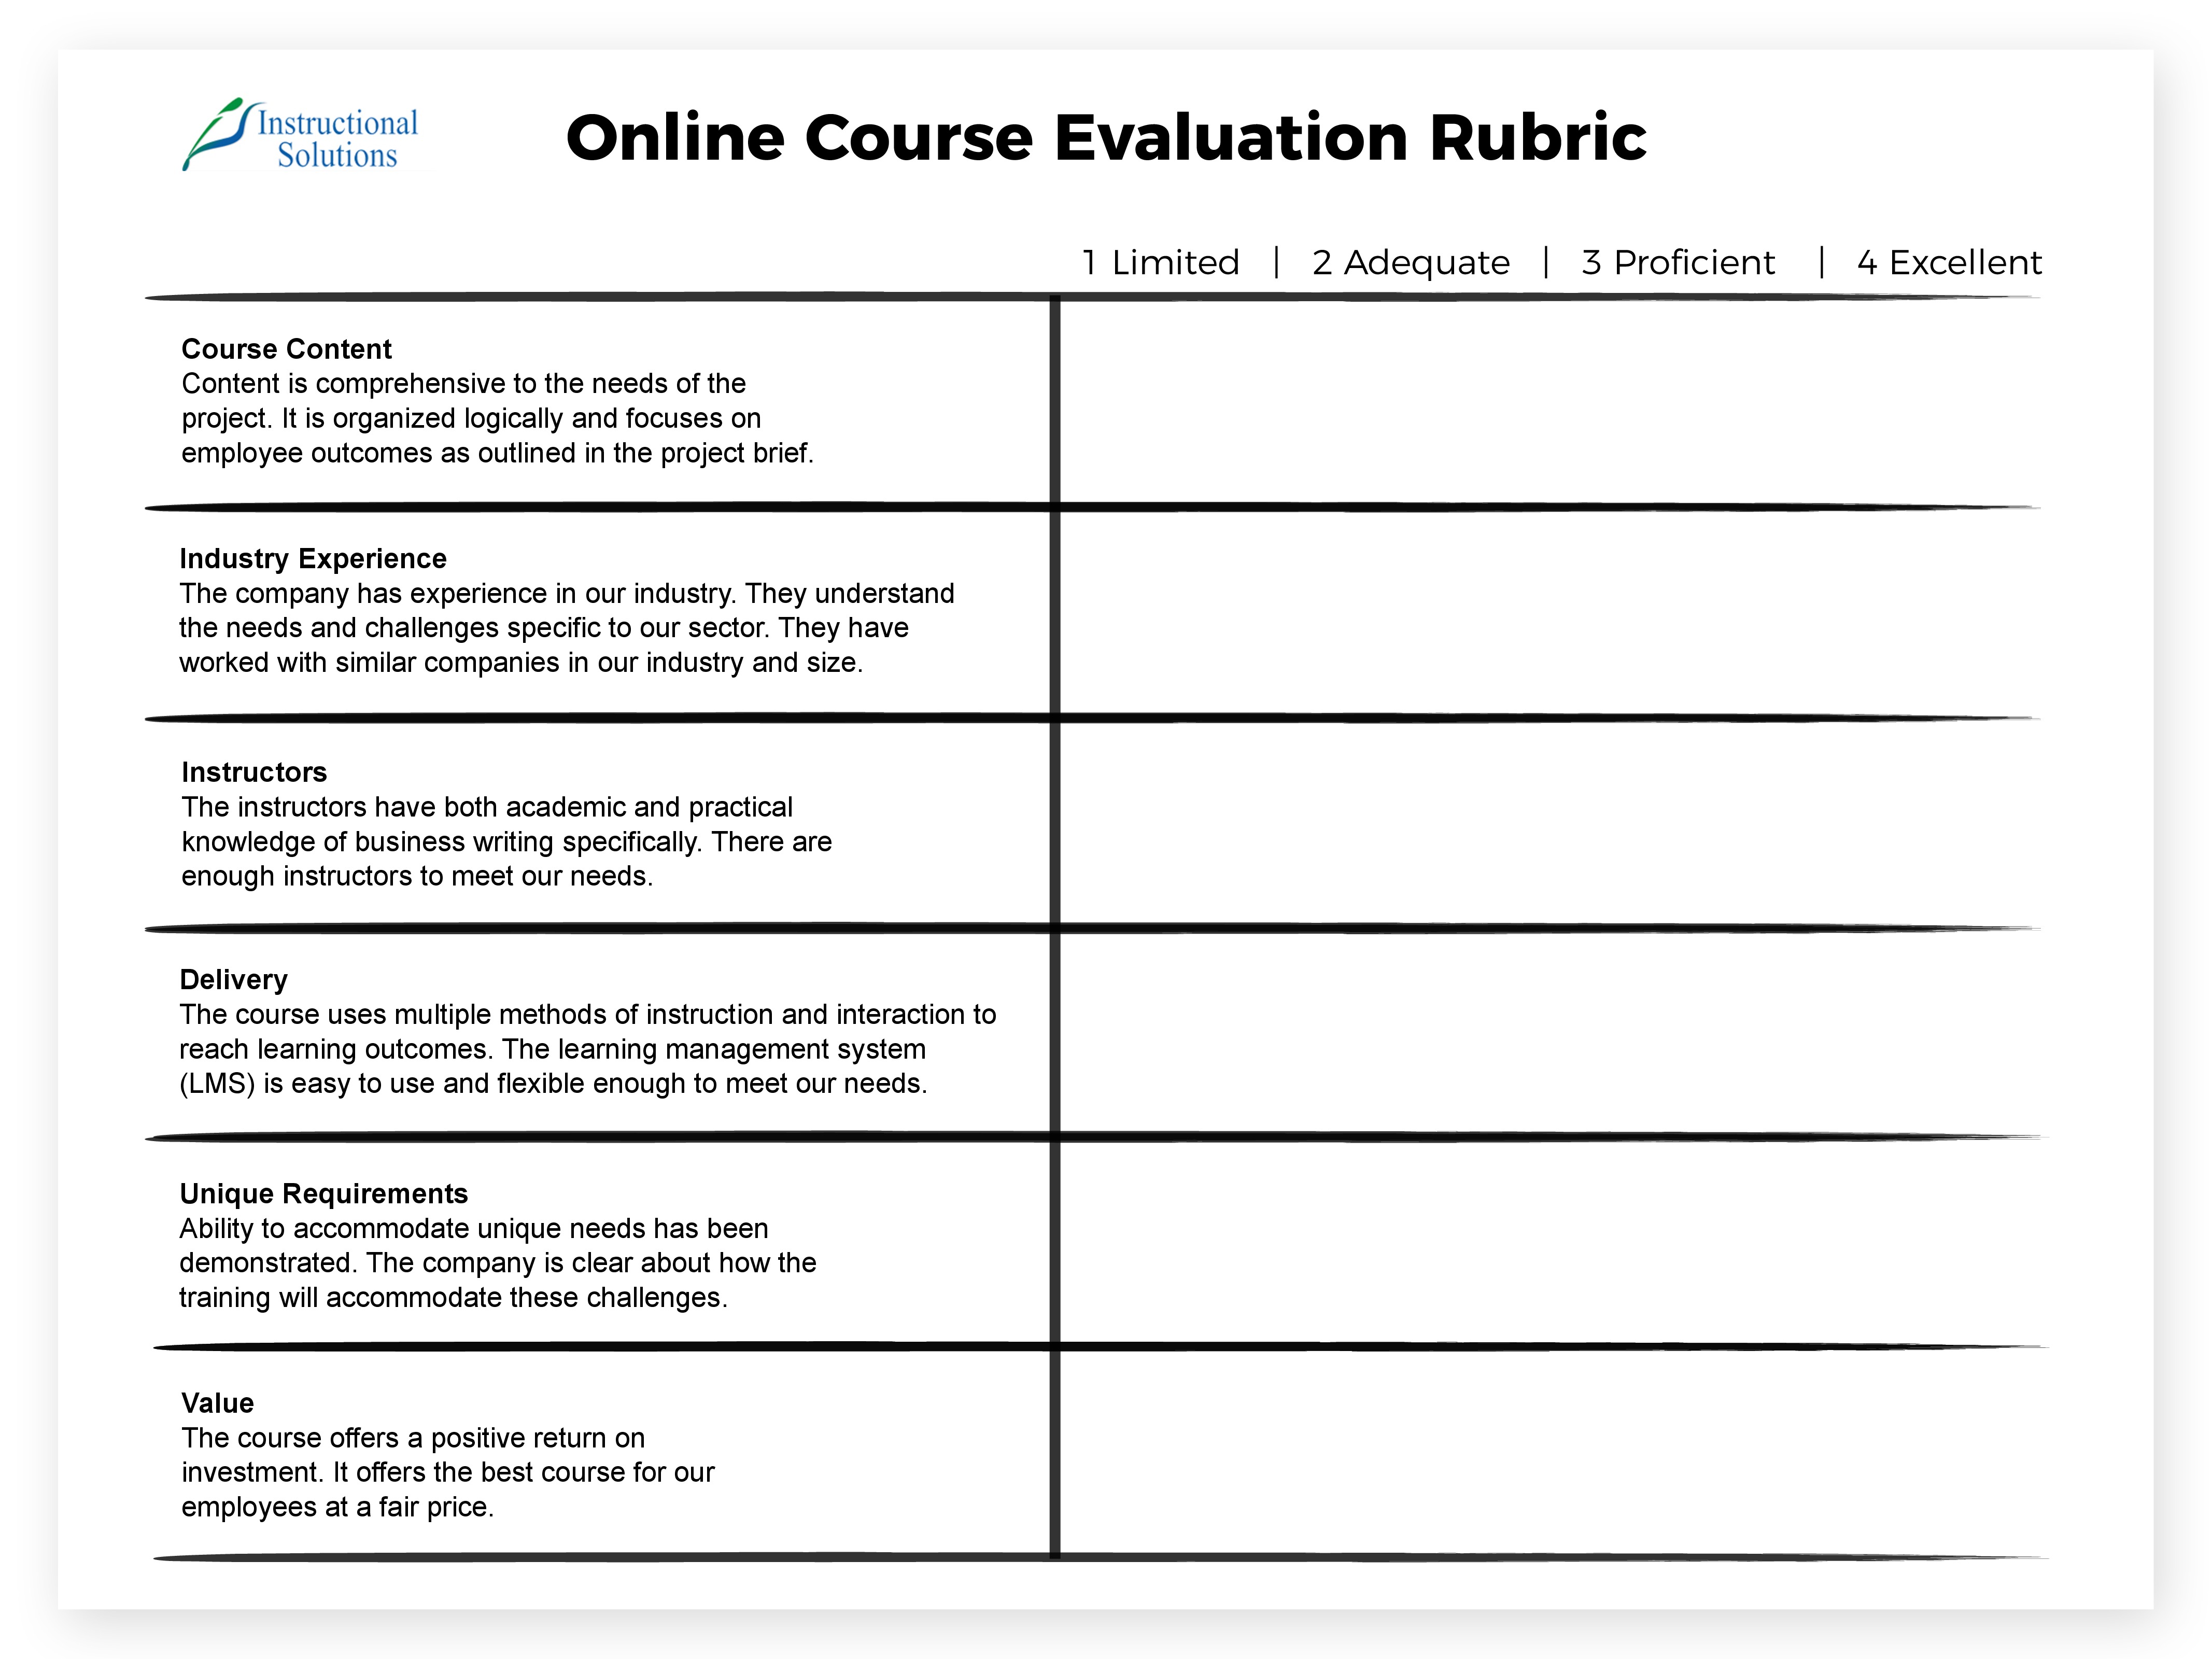 Online course rubric from Instructional Solutions via Word Wise at Nonprofit Copywriter